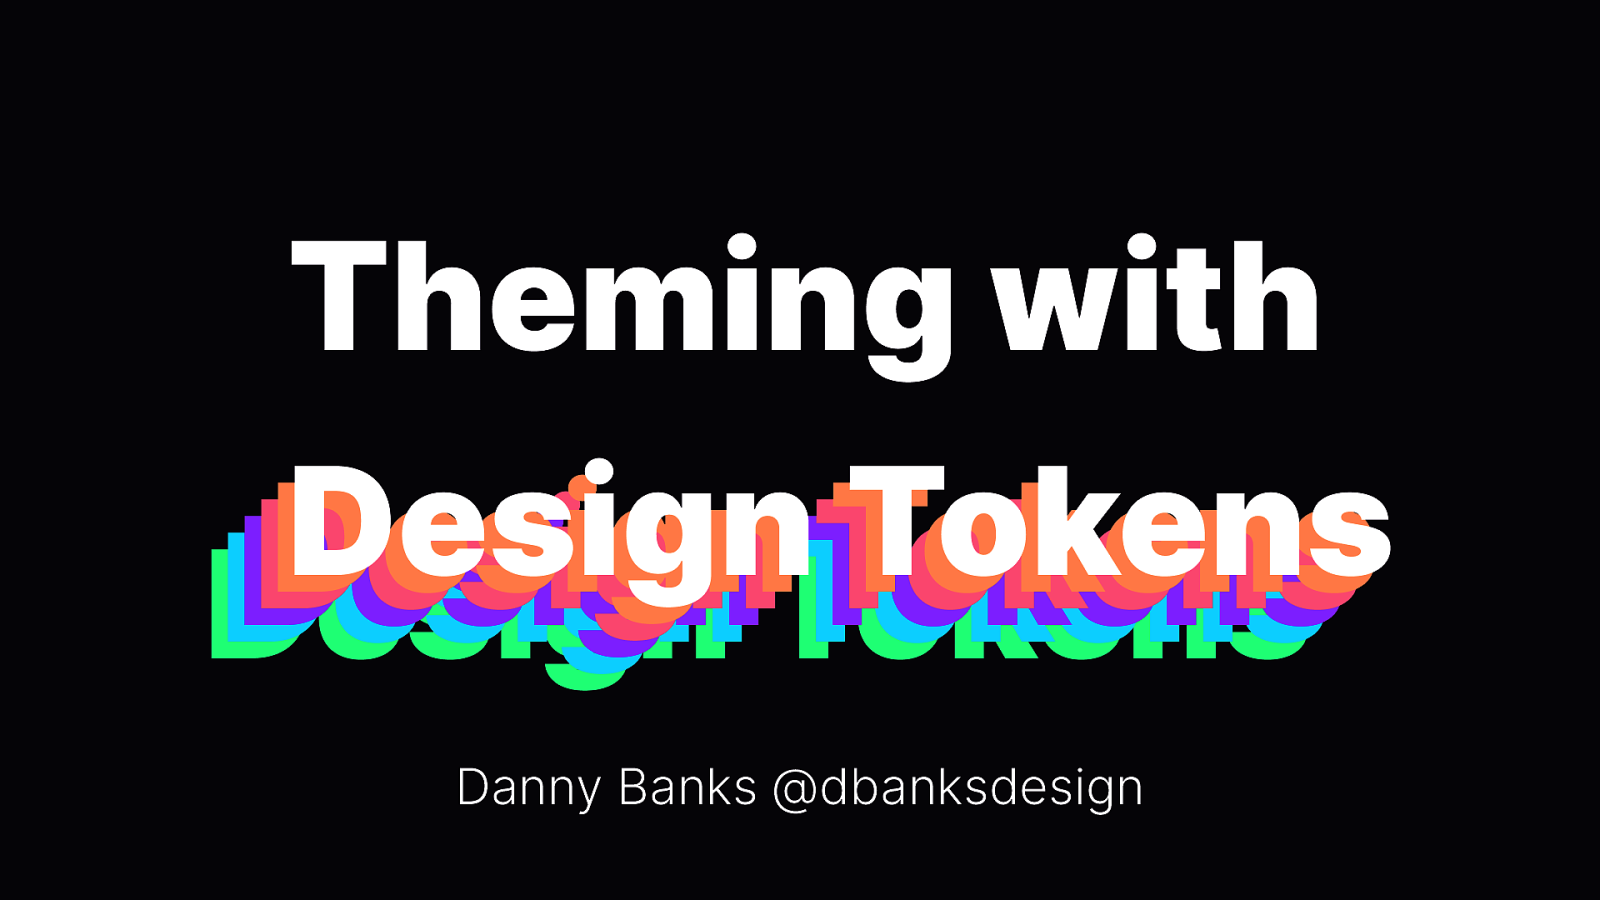 Theming with Design Tokens